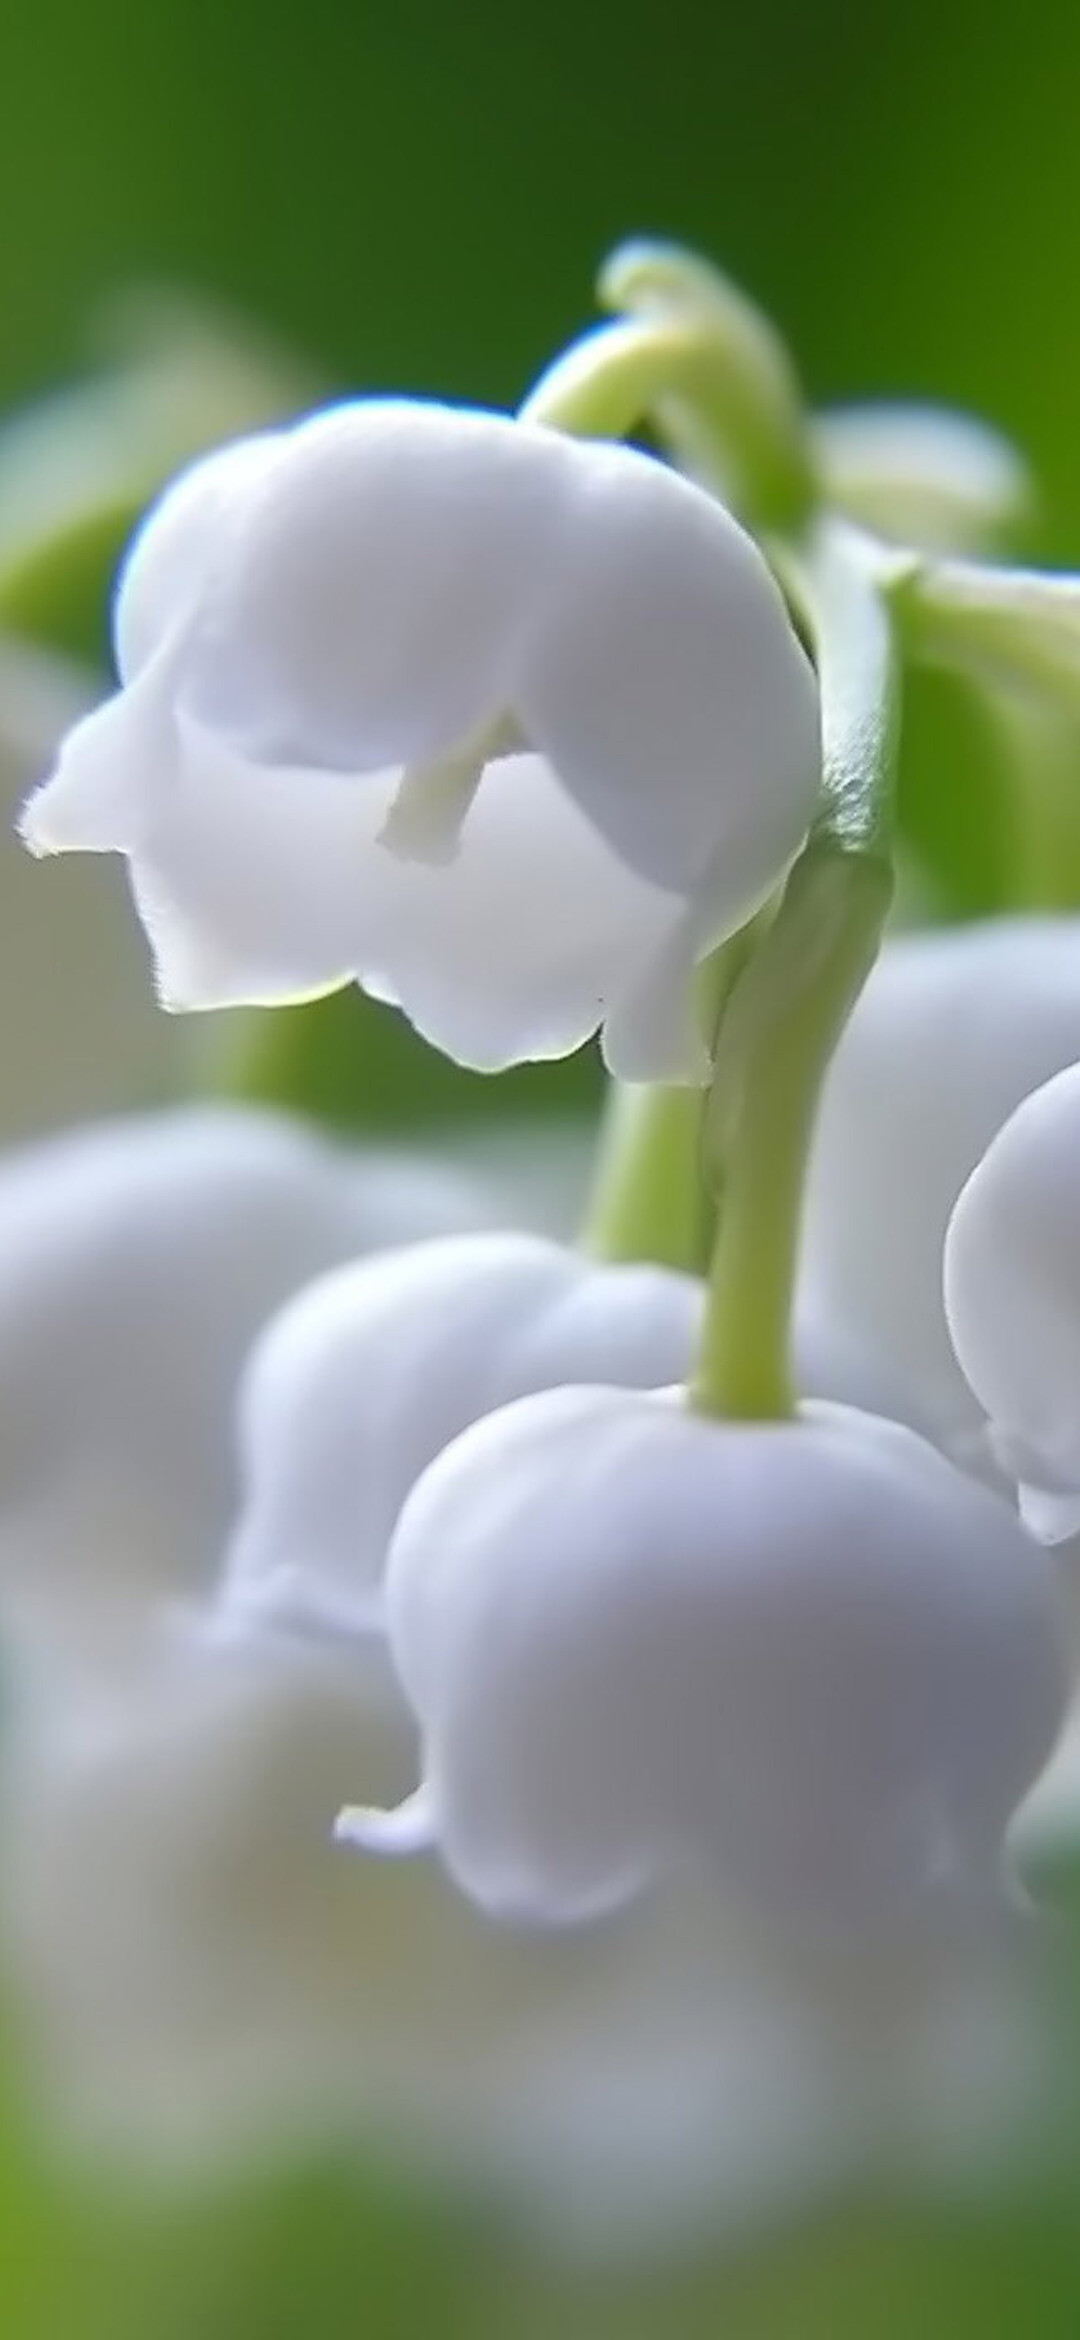 Lily of the Valley: The national flower of Finland, Herbaceous plant. 1080x2340 HD Wallpaper.